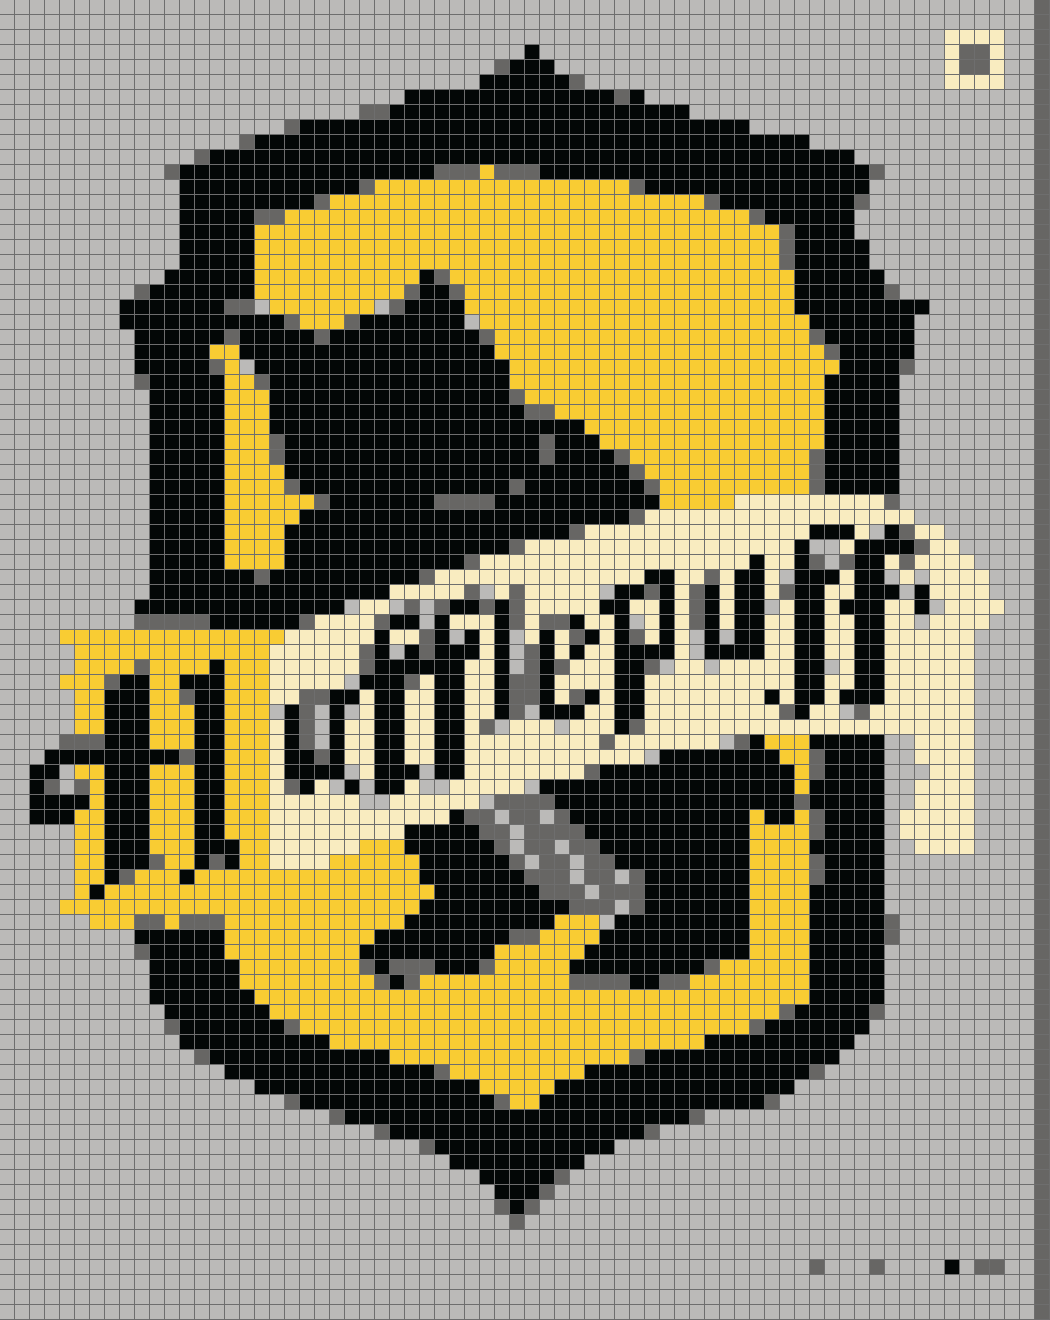 A cross-stitch pattern for the Hufflepuff crest.